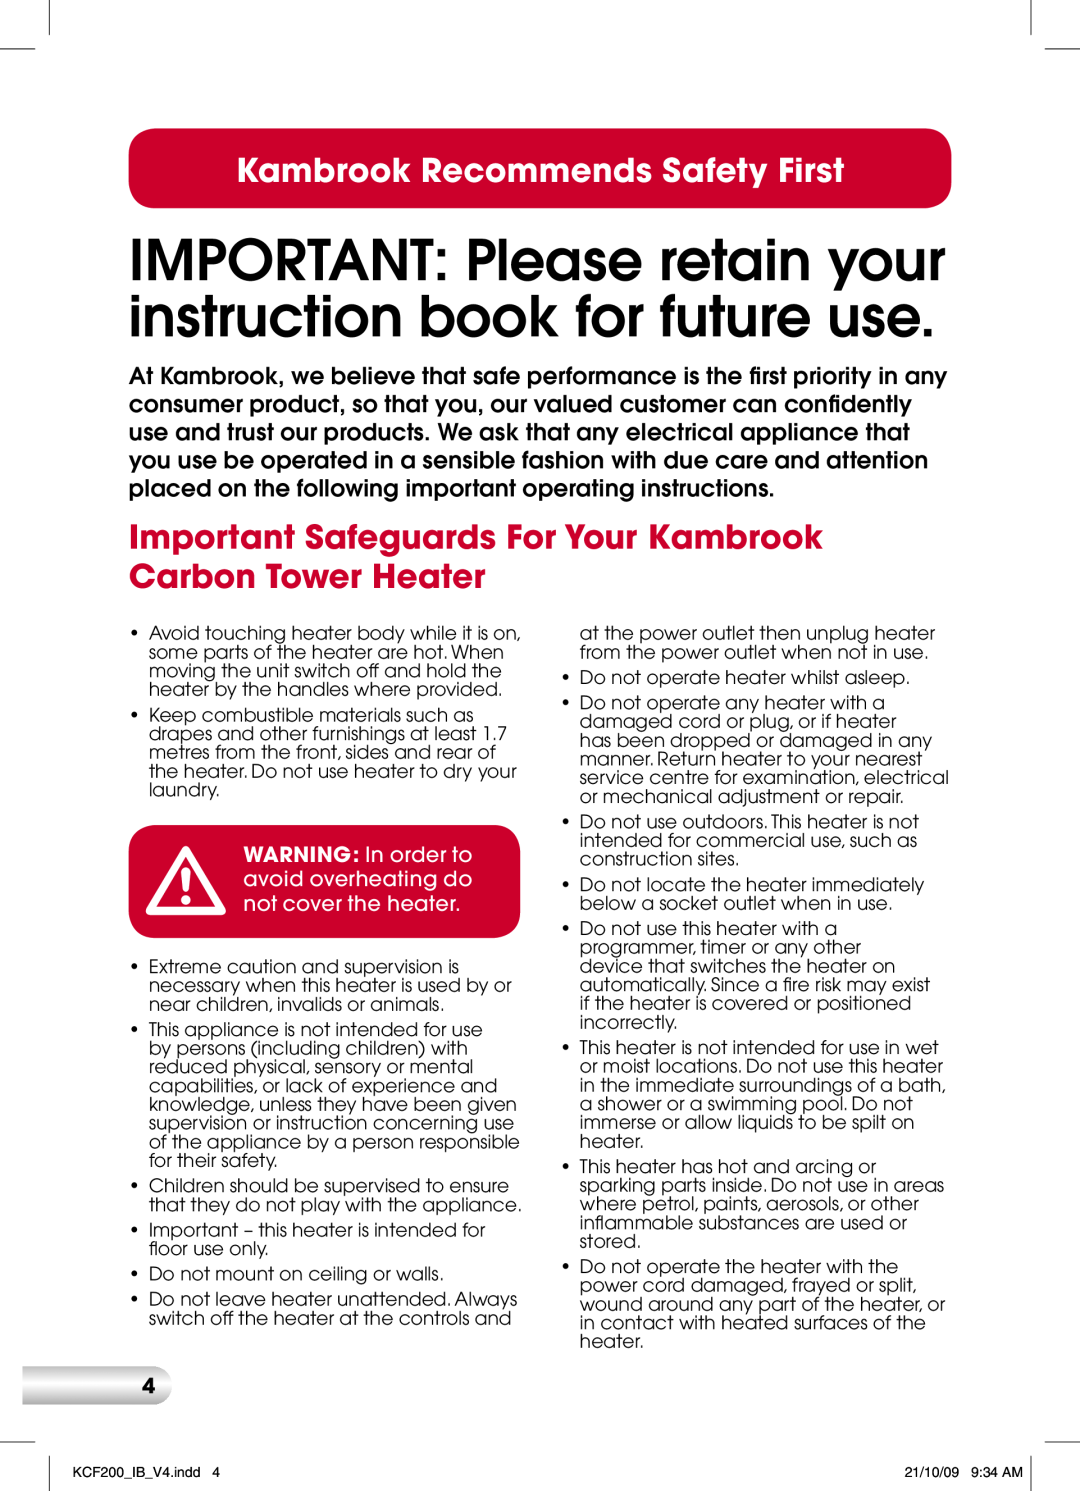 Kambrook KCF200 manual Kambrook Recommends Safety First 